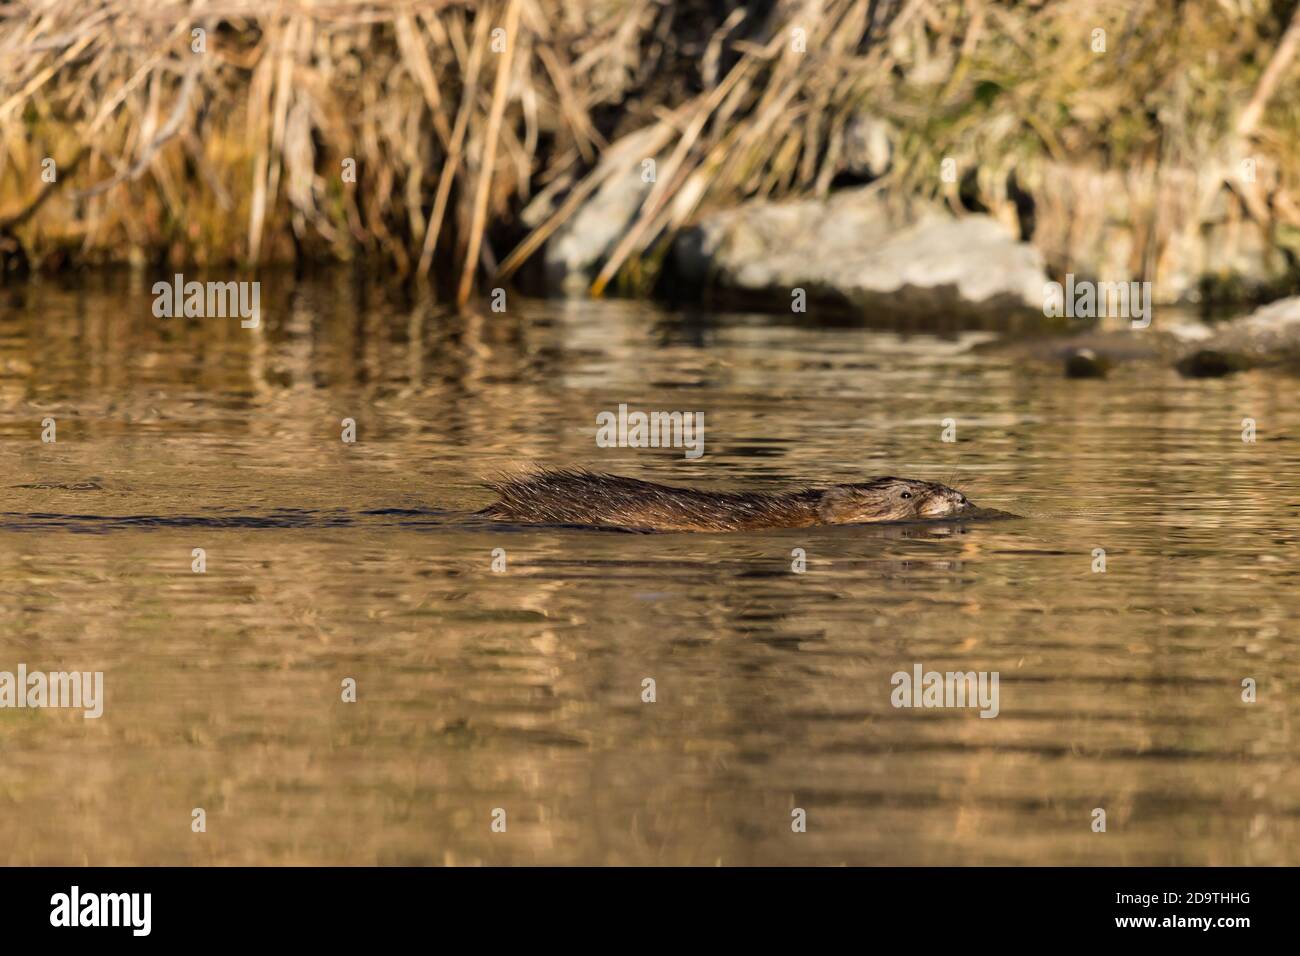 The Muskrat, Ondatra zibethicus, is a medium-sized semi-aquatic rodent.  It is native to North America, but has been introduced into Europe, where it Stock Photo